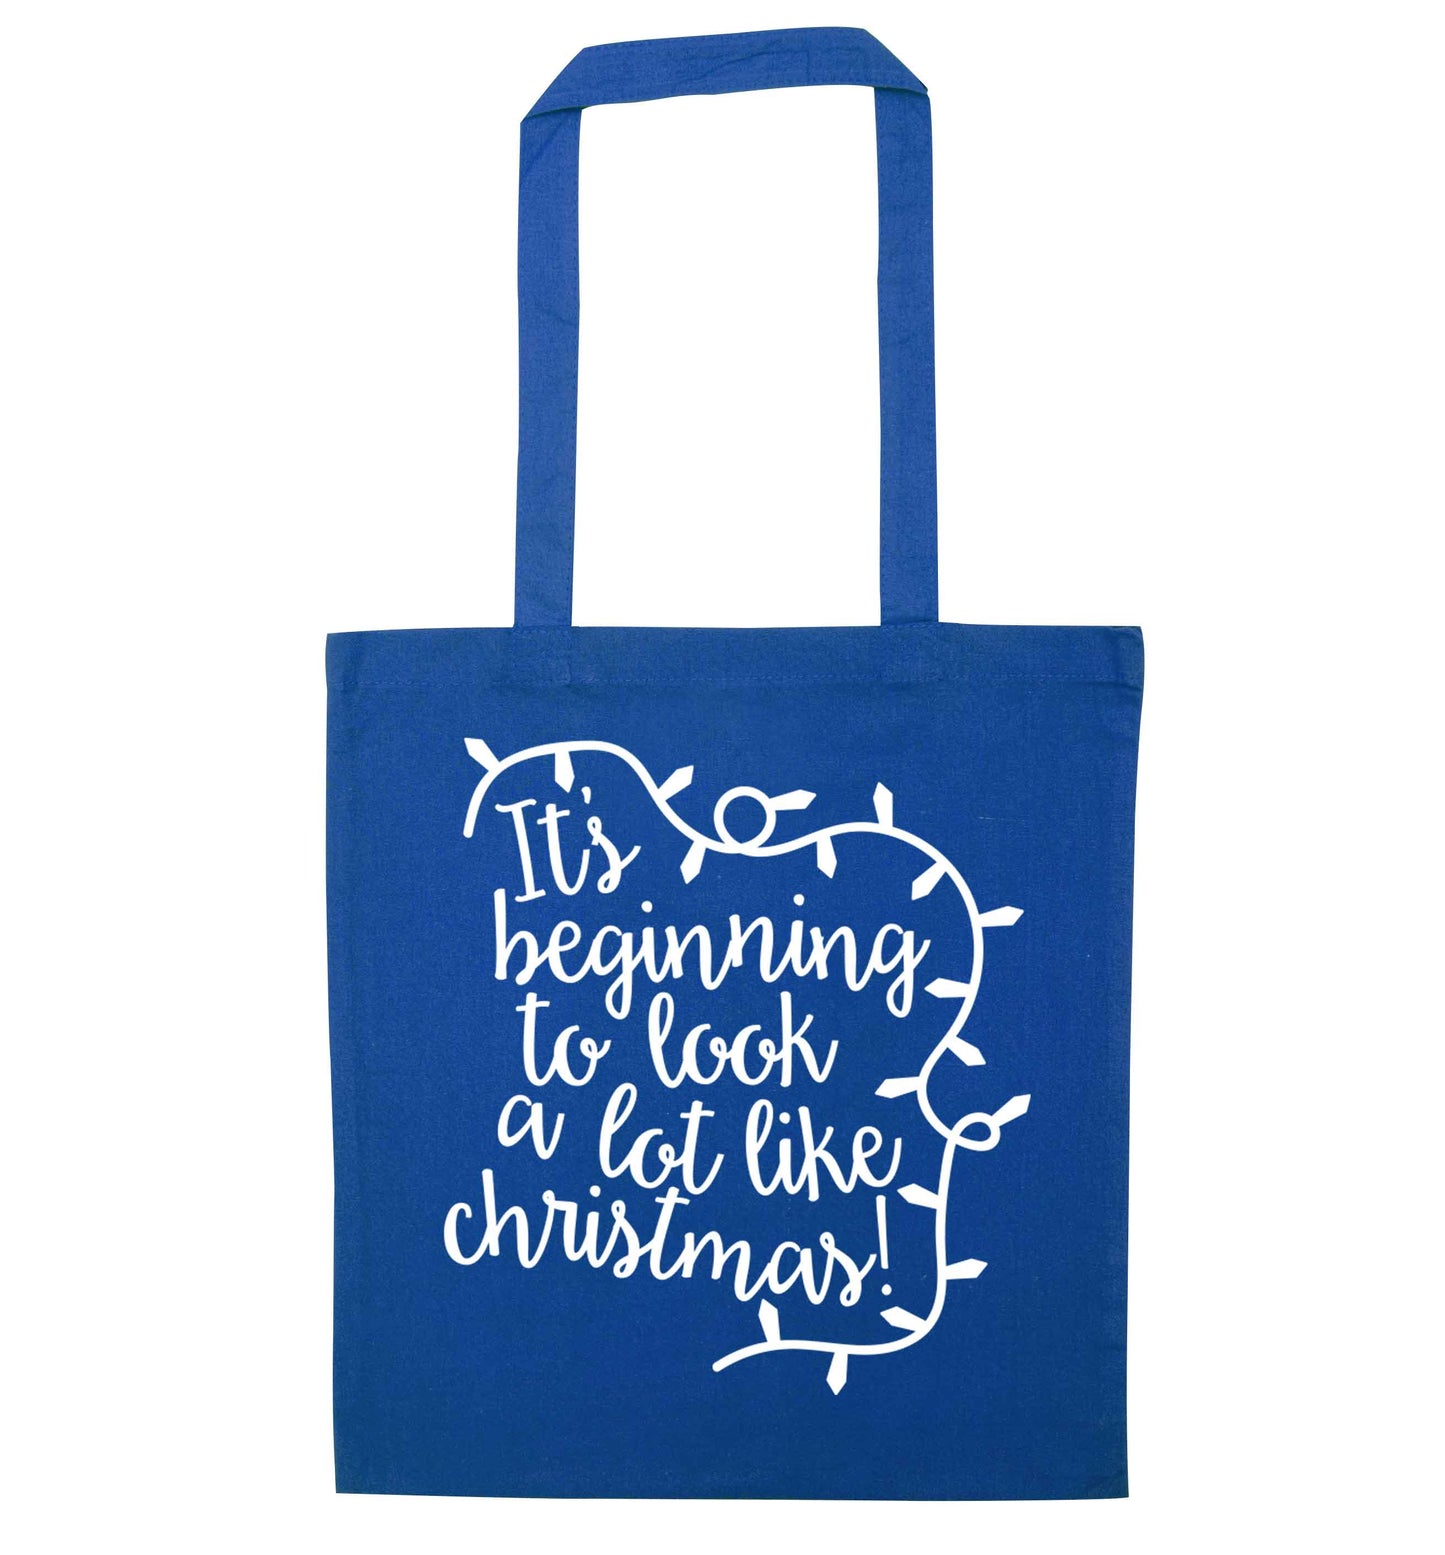 It's beginning to look a lot like Christmas blue tote bag